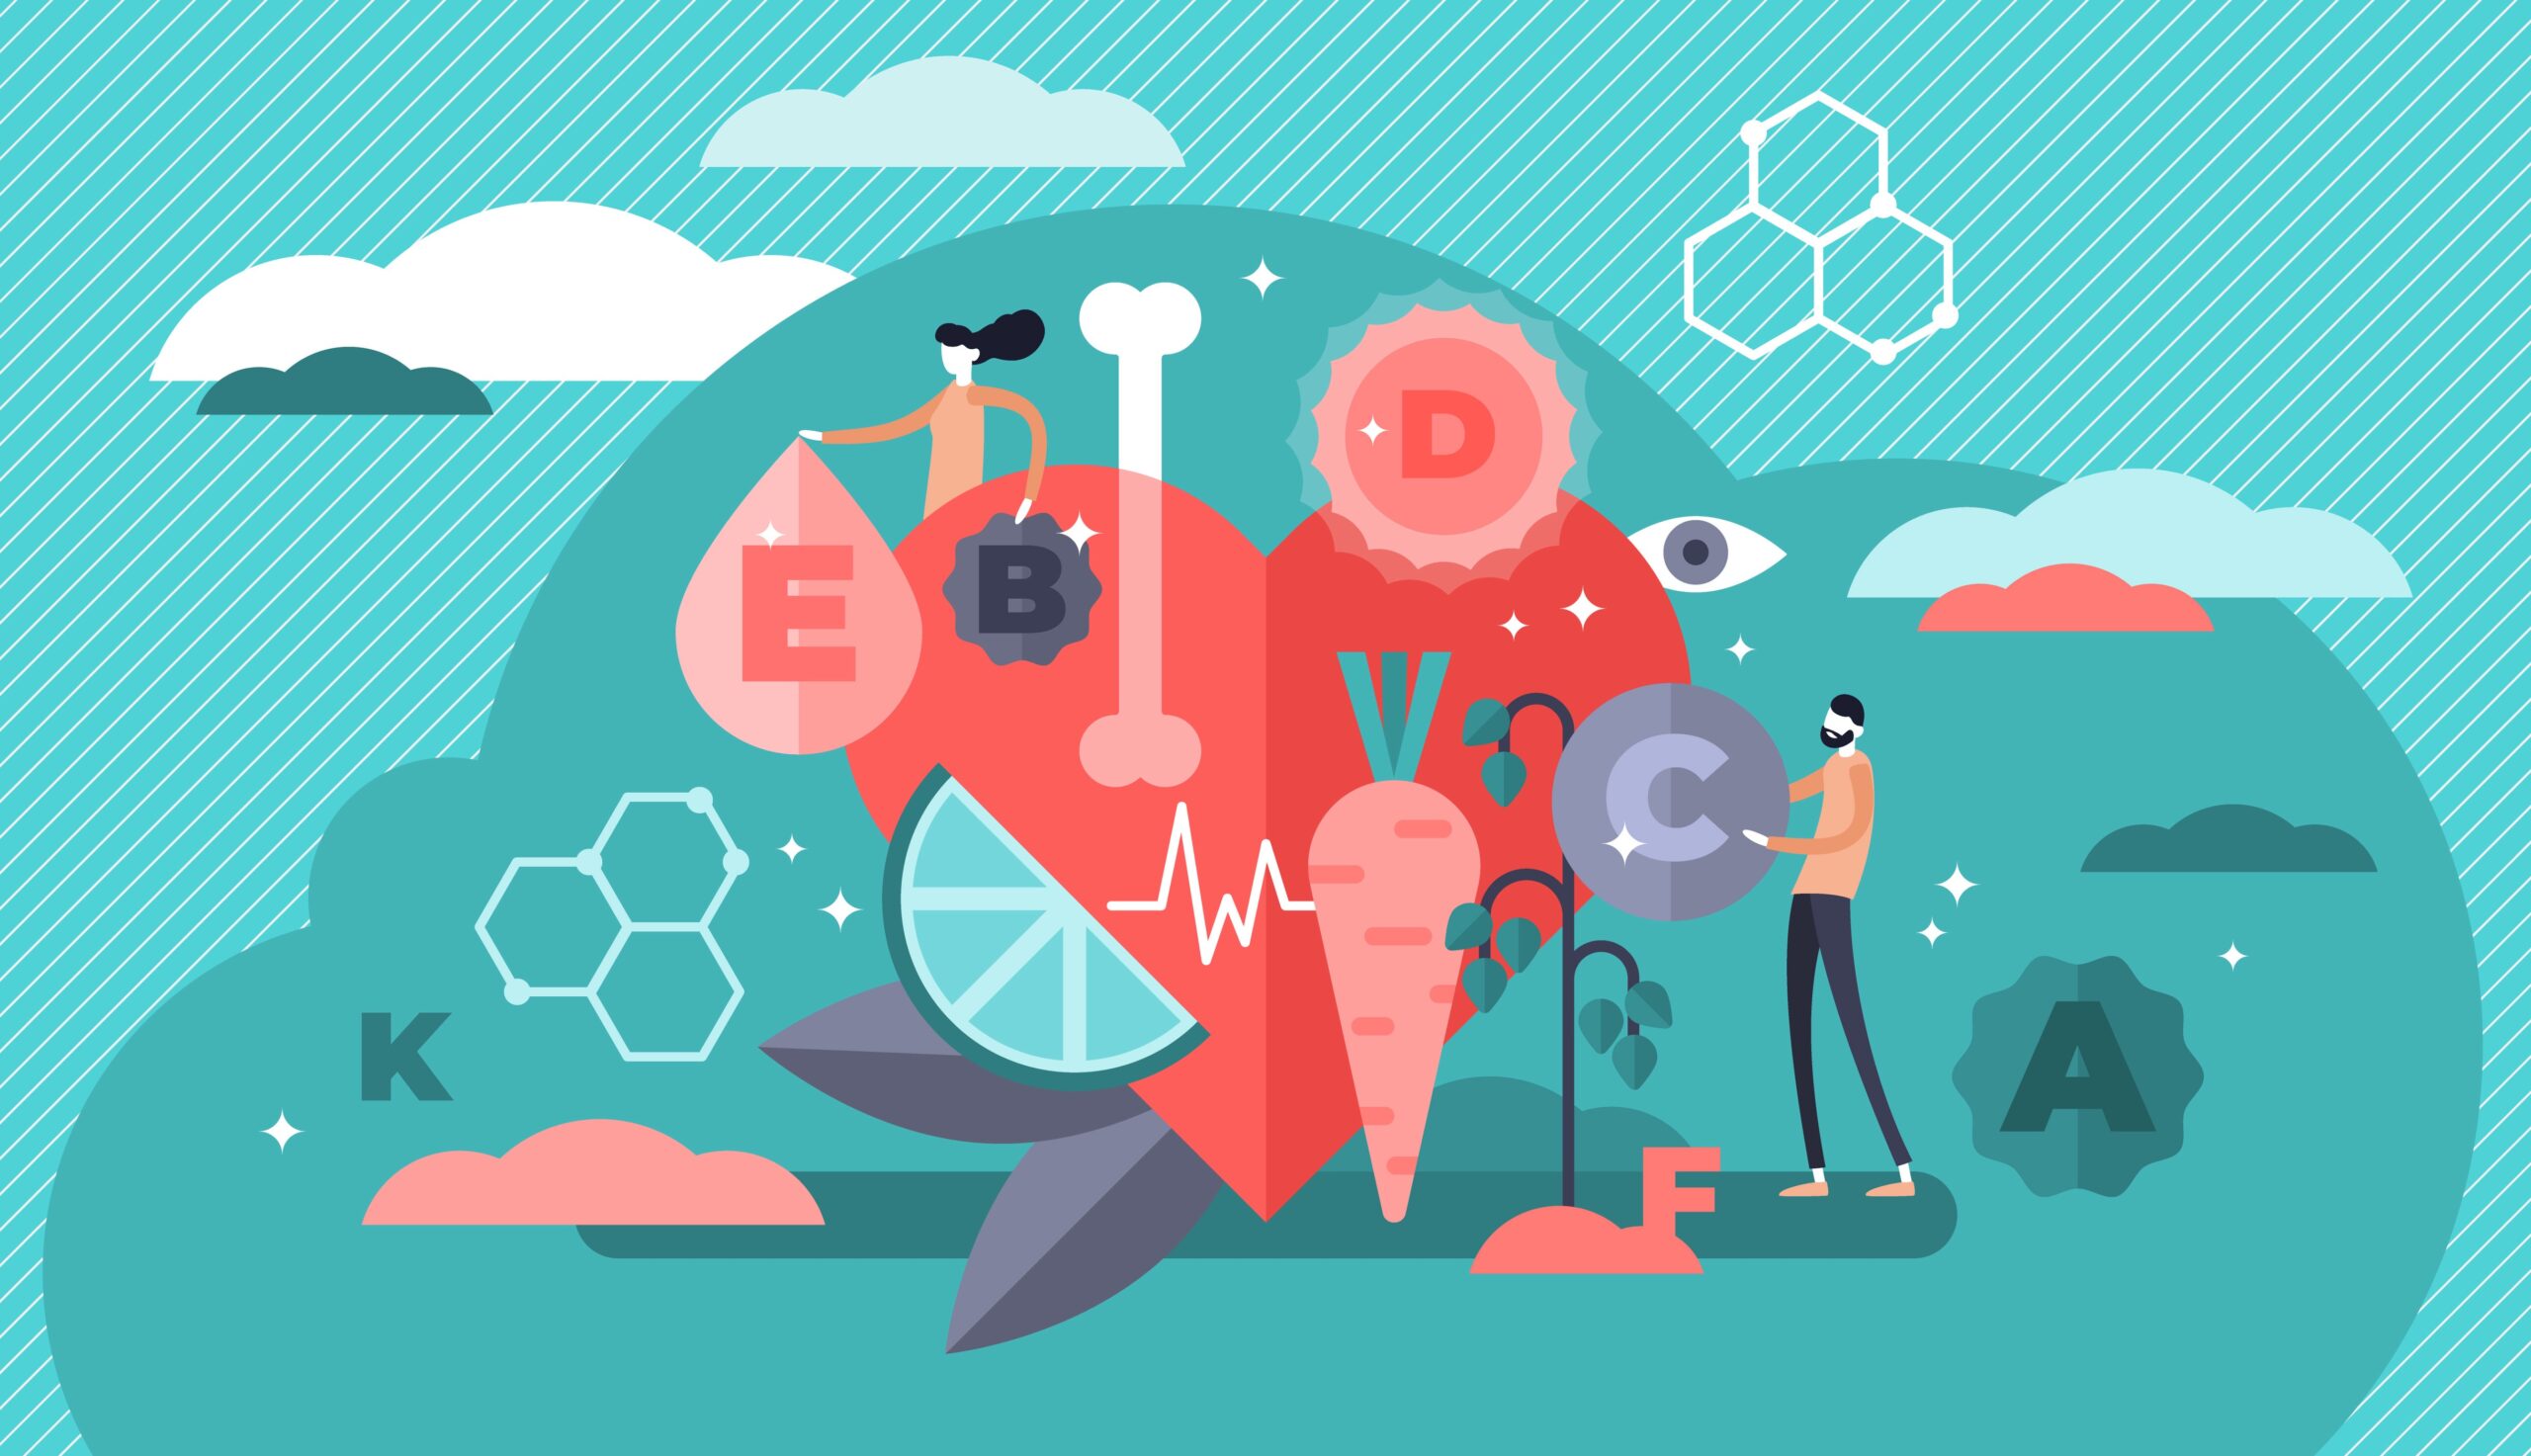 A vector illustration in multi colors against a teal backdrop. Pictured: A heart at the center, chemistry lab items, a lime wedge, and a carrot with bubbles surrounding the image.